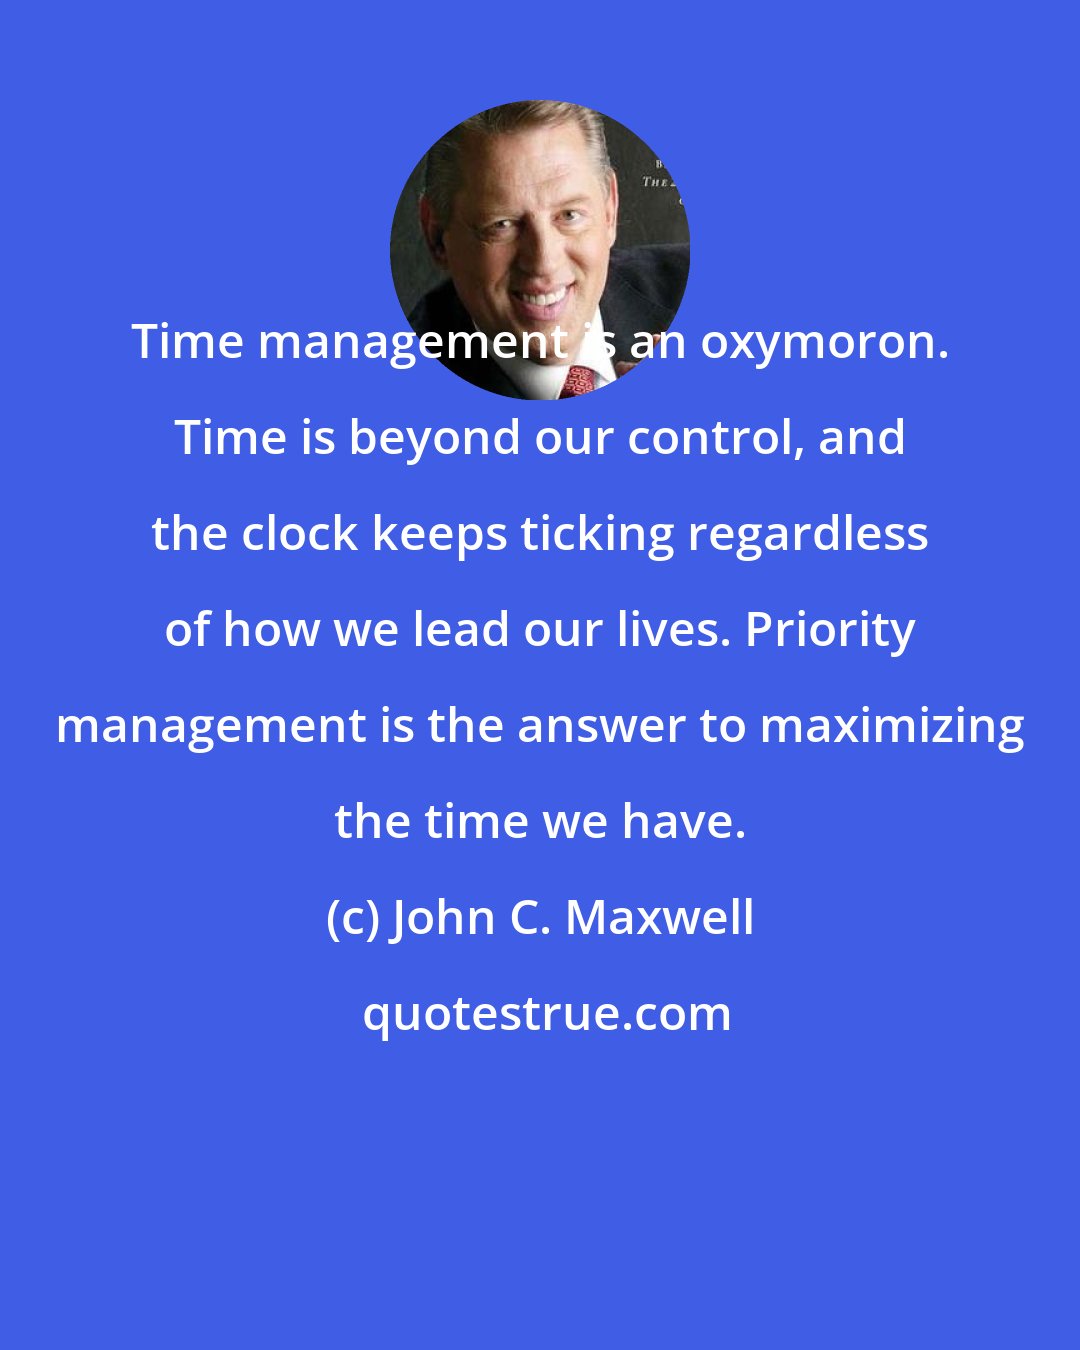 John C. Maxwell: Time management is an oxymoron. Time is beyond our control, and the clock keeps ticking regardless of how we lead our lives. Priority management is the answer to maximizing the time we have.